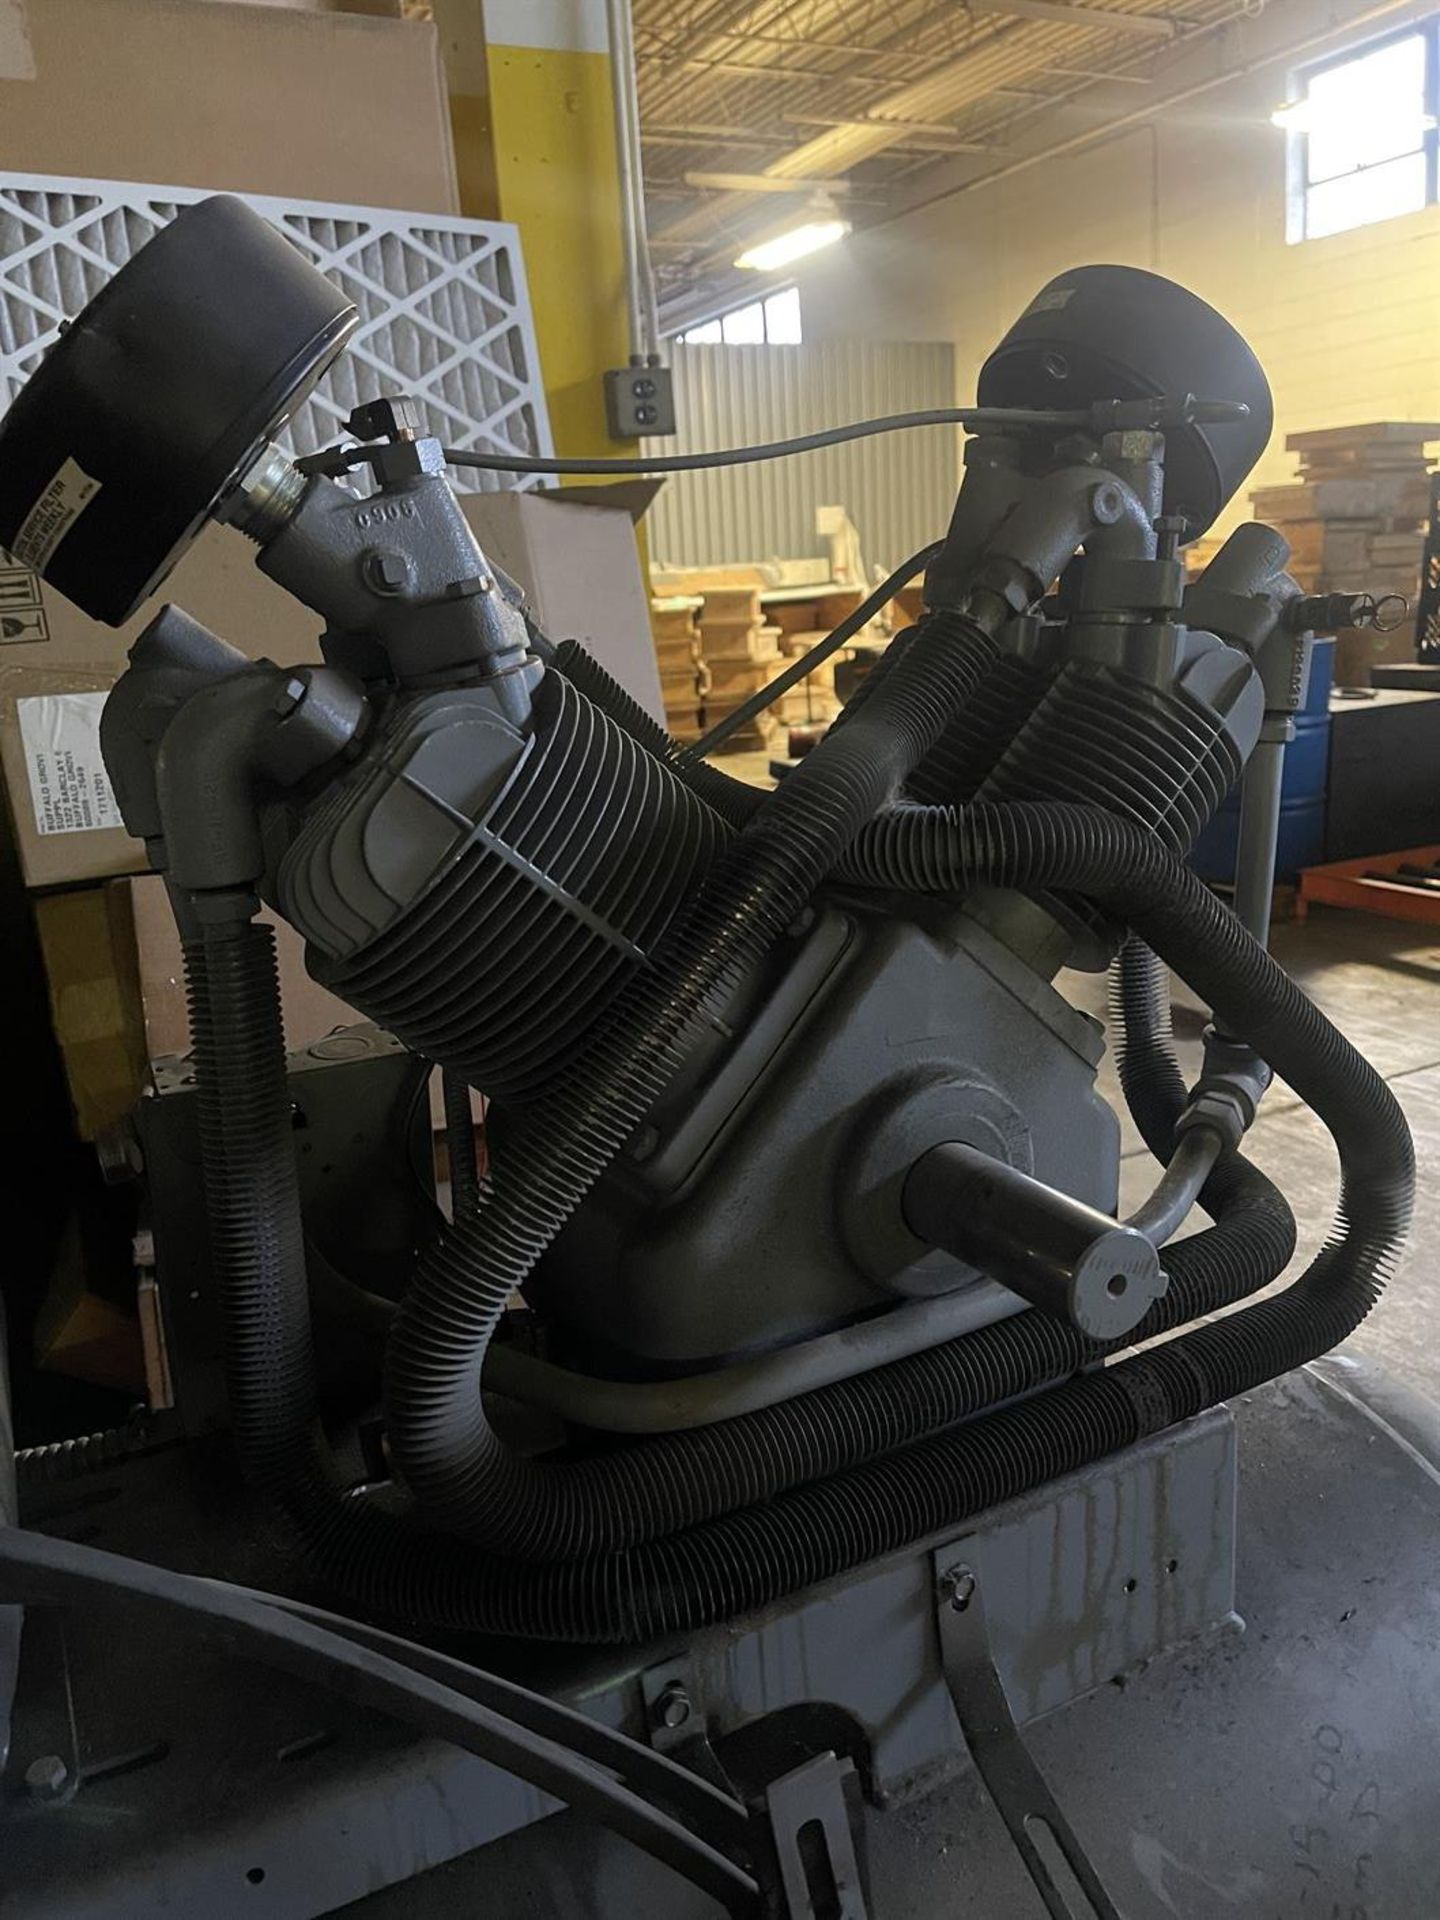 GARDNER DENVER 10 HP Dual Piston Air Compressor, (Item located at 2375 Touhy Ave, Elk Grove Village, - Image 4 of 4